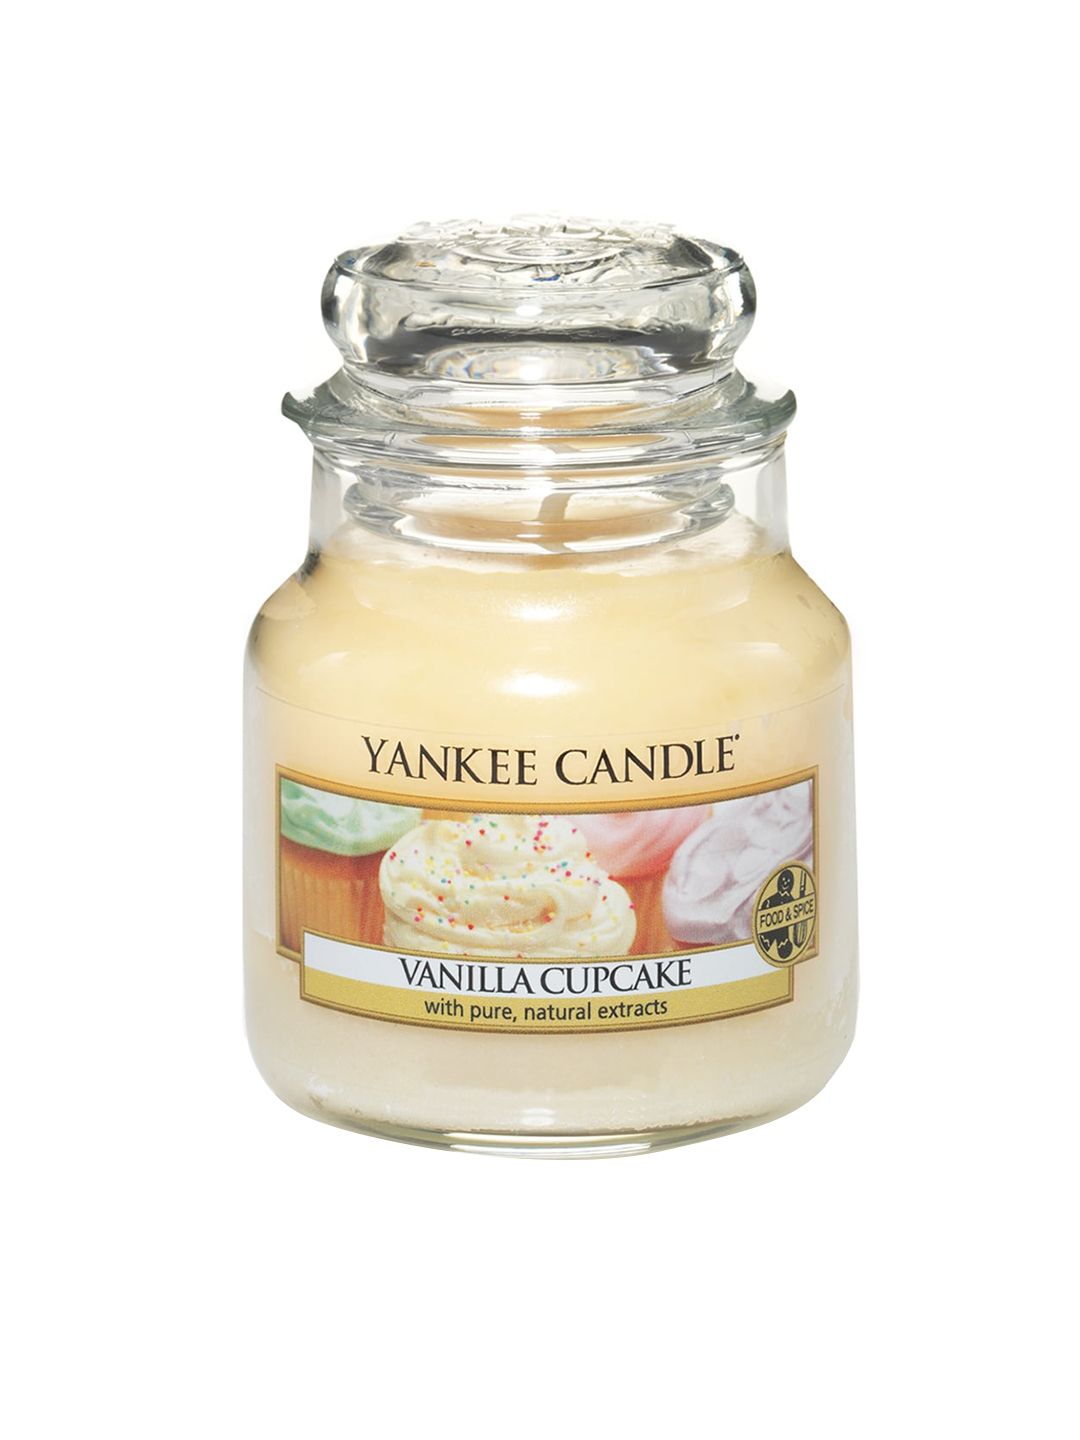 YANKEE CANDLE Cream-Coloured Vanilla Cupcake Scented Jar Candle Price in India